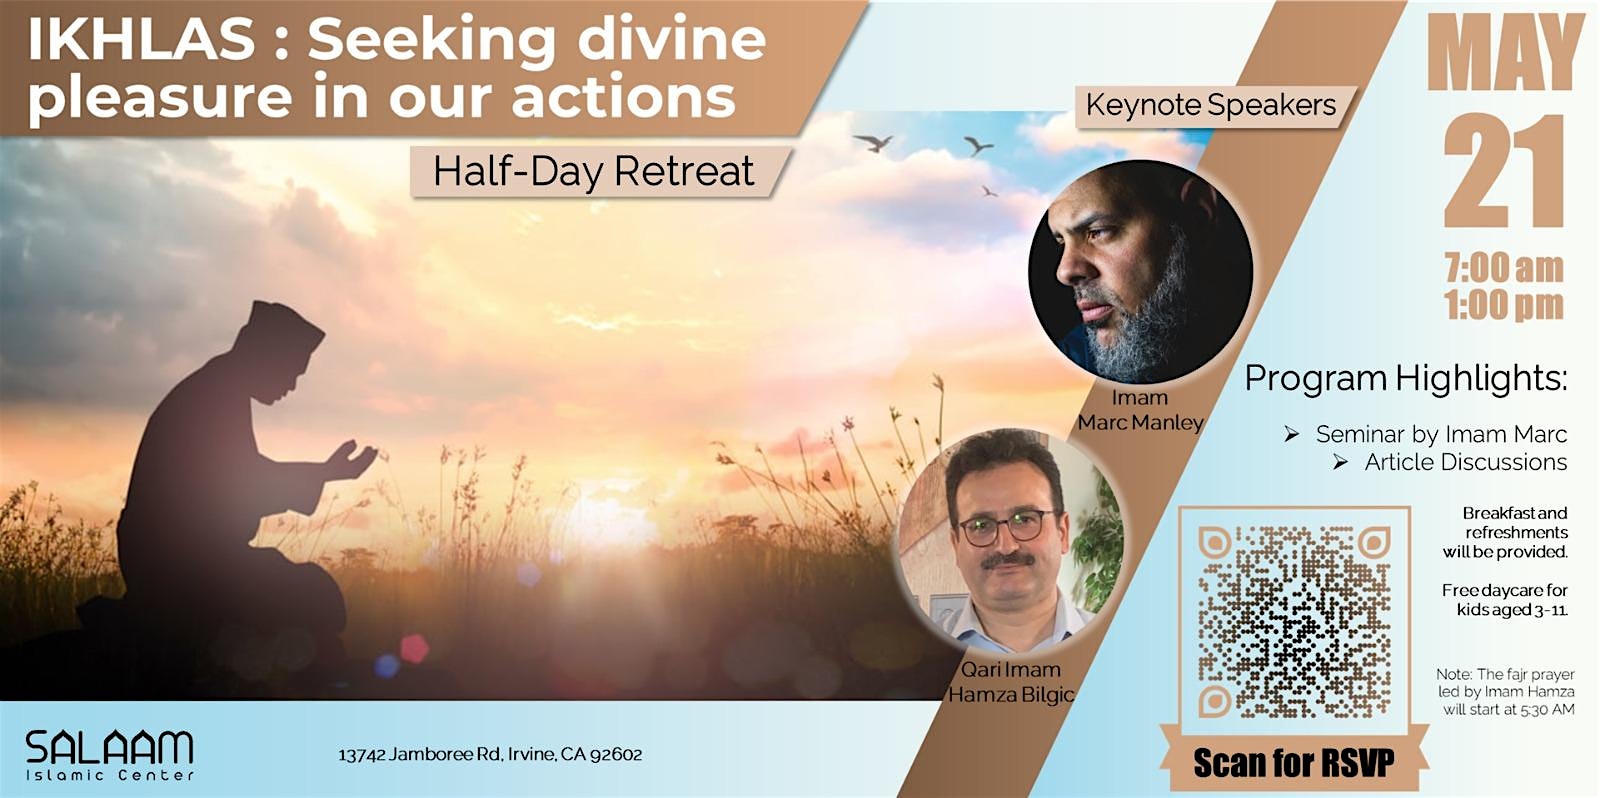 Half-Day Retreat – IKHLAS: Seeking divine pleasure in our actions